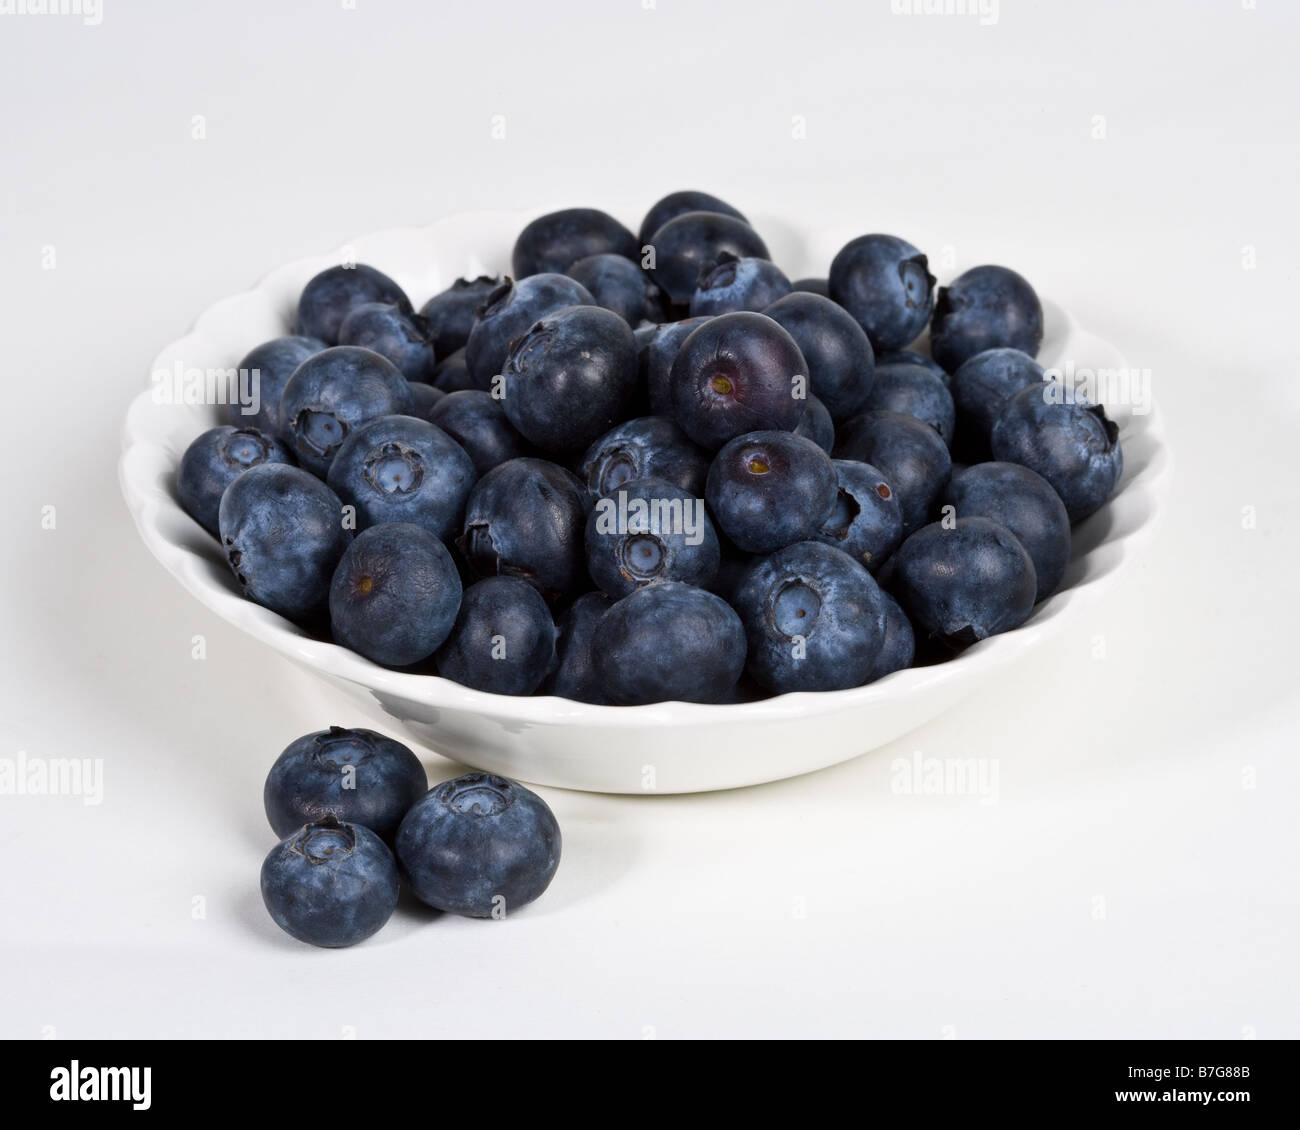 A bowl of blueberries Stock Photo